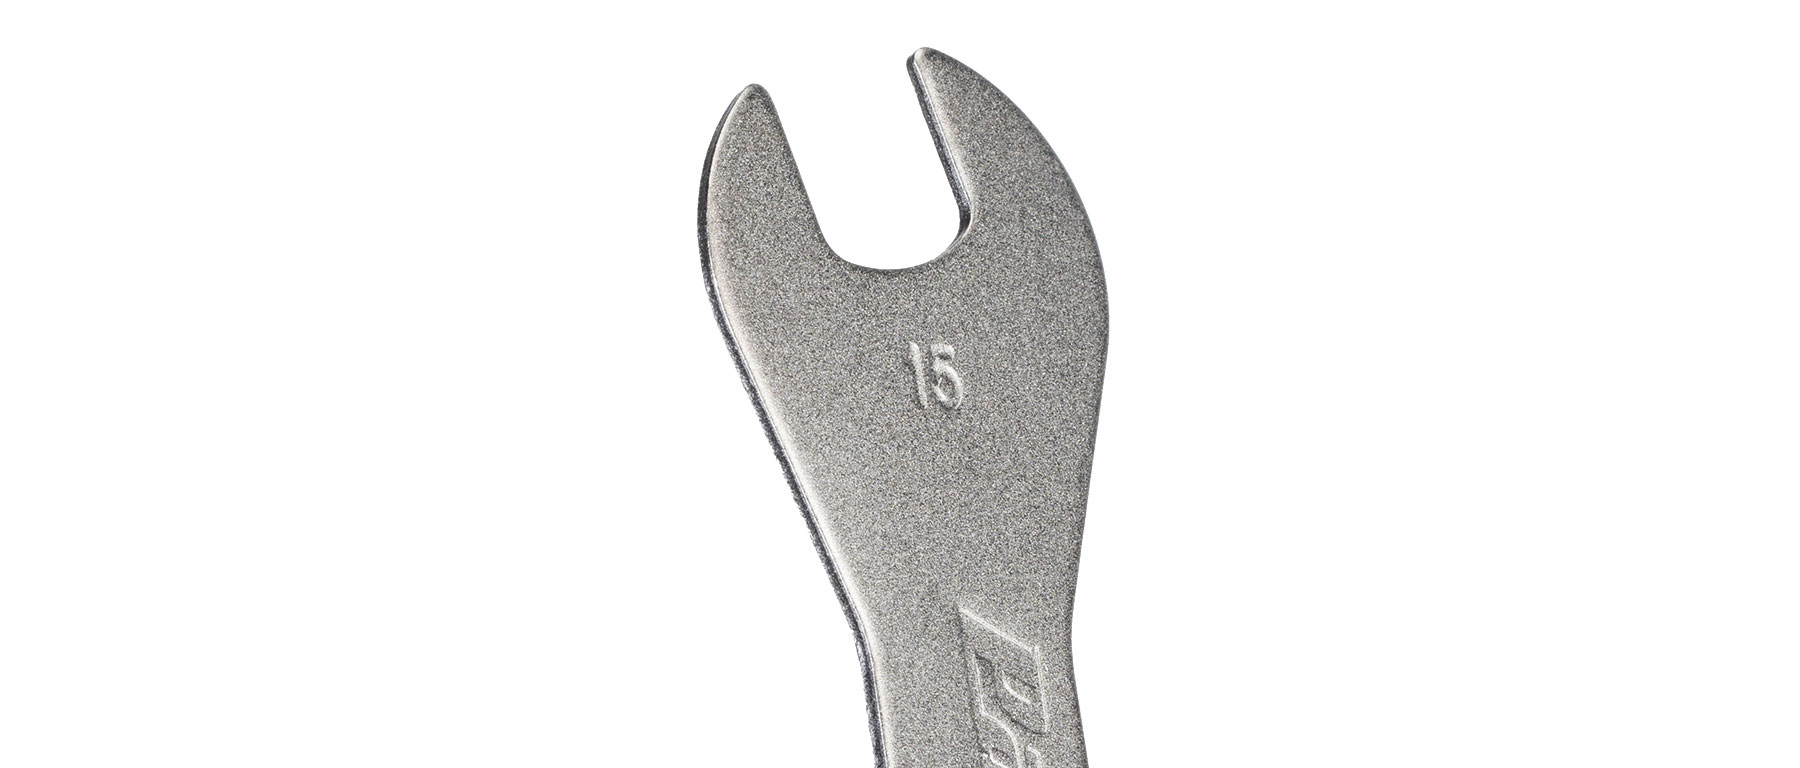 Park Tool DCW-2 Double Ended Cone Wrench